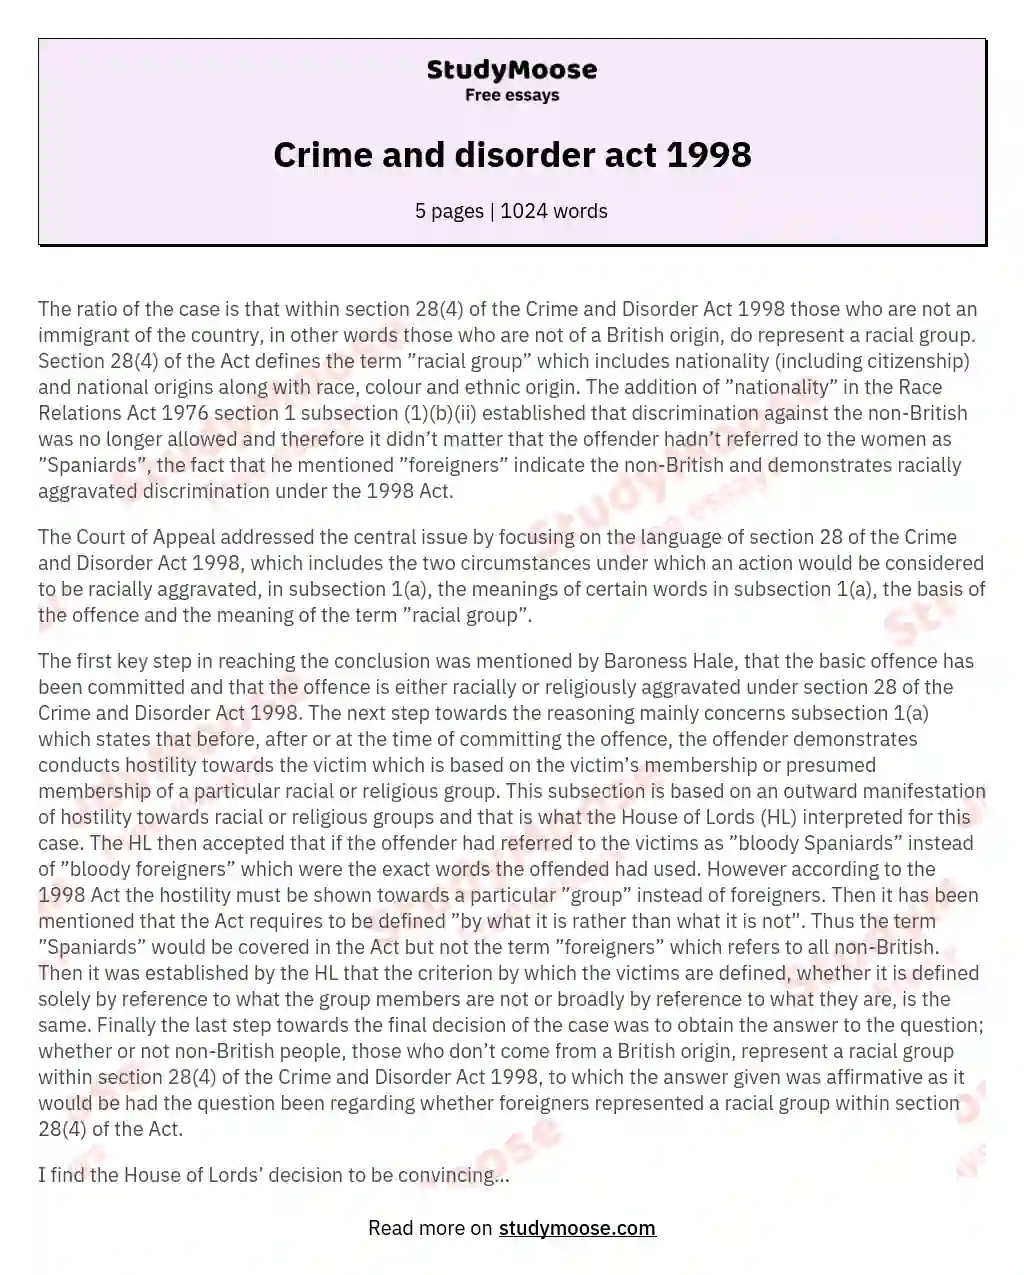 Crime and disorder act 1998 essay